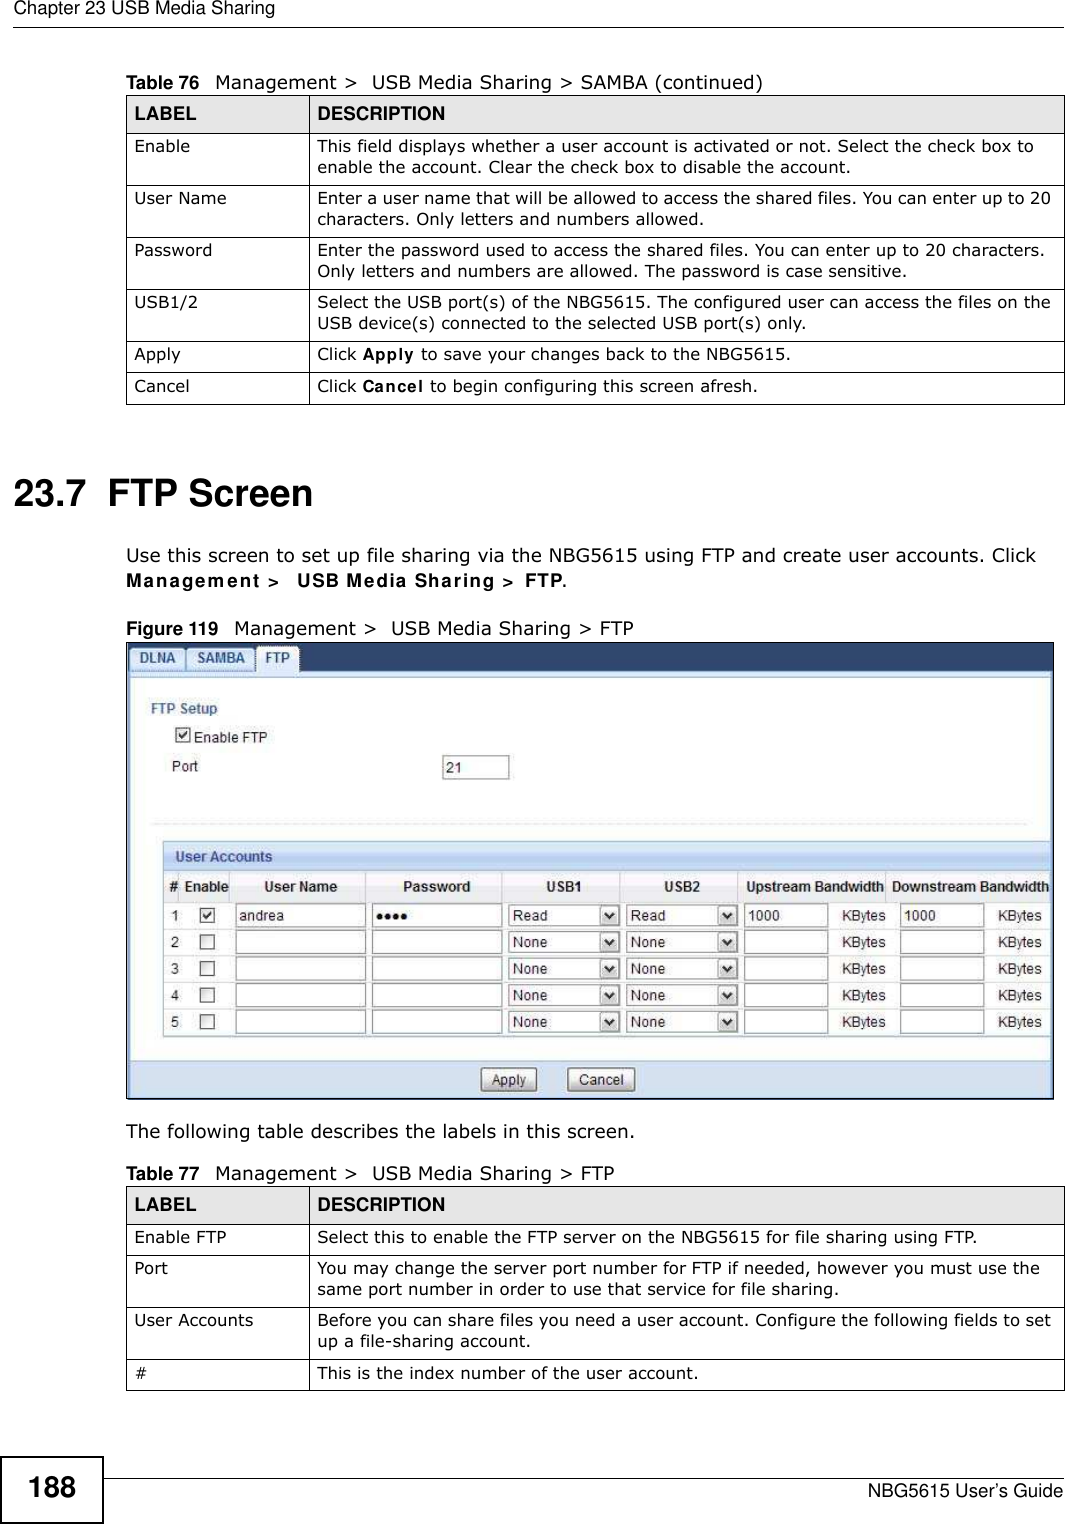 Chapter 23 USB Media SharingNBG5615 User’s Guide18823.7  FTP ScreenUse this screen to set up file sharing via the NBG5615 using FTP and create user accounts. Click Managem ent &gt;   USB Media Sharing &gt;  FTP.Figure 119   Management &gt;  USB Media Sharing &gt; FTP The following table describes the labels in this screen.Enable This field displays whether a user account is activated or not. Select the check box to enable the account. Clear the check box to disable the account.User Name Enter a user name that will be allowed to access the shared files. You can enter up to 20 characters. Only letters and numbers allowed.Password Enter the password used to access the shared files. You can enter up to 20 characters. Only letters and numbers are allowed. The password is case sensitive.USB1/2 Select the USB port(s) of the NBG5615. The configured user can access the files on the USB device(s) connected to the selected USB port(s) only.Apply Click Apply to save your changes back to the NBG5615.Cancel Click Cancel to begin configuring this screen afresh.Table 76   Management &gt;  USB Media Sharing &gt; SAMBA (continued)LABEL DESCRIPTIONTable 77   Management &gt;  USB Media Sharing &gt; FTPLABEL DESCRIPTIONEnable FTP Select this to enable the FTP server on the NBG5615 for file sharing using FTP.Port You may change the server port number for FTP if needed, however you must use the same port number in order to use that service for file sharing.User Accounts Before you can share files you need a user account. Configure the following fields to set up a file-sharing account. #This is the index number of the user account.